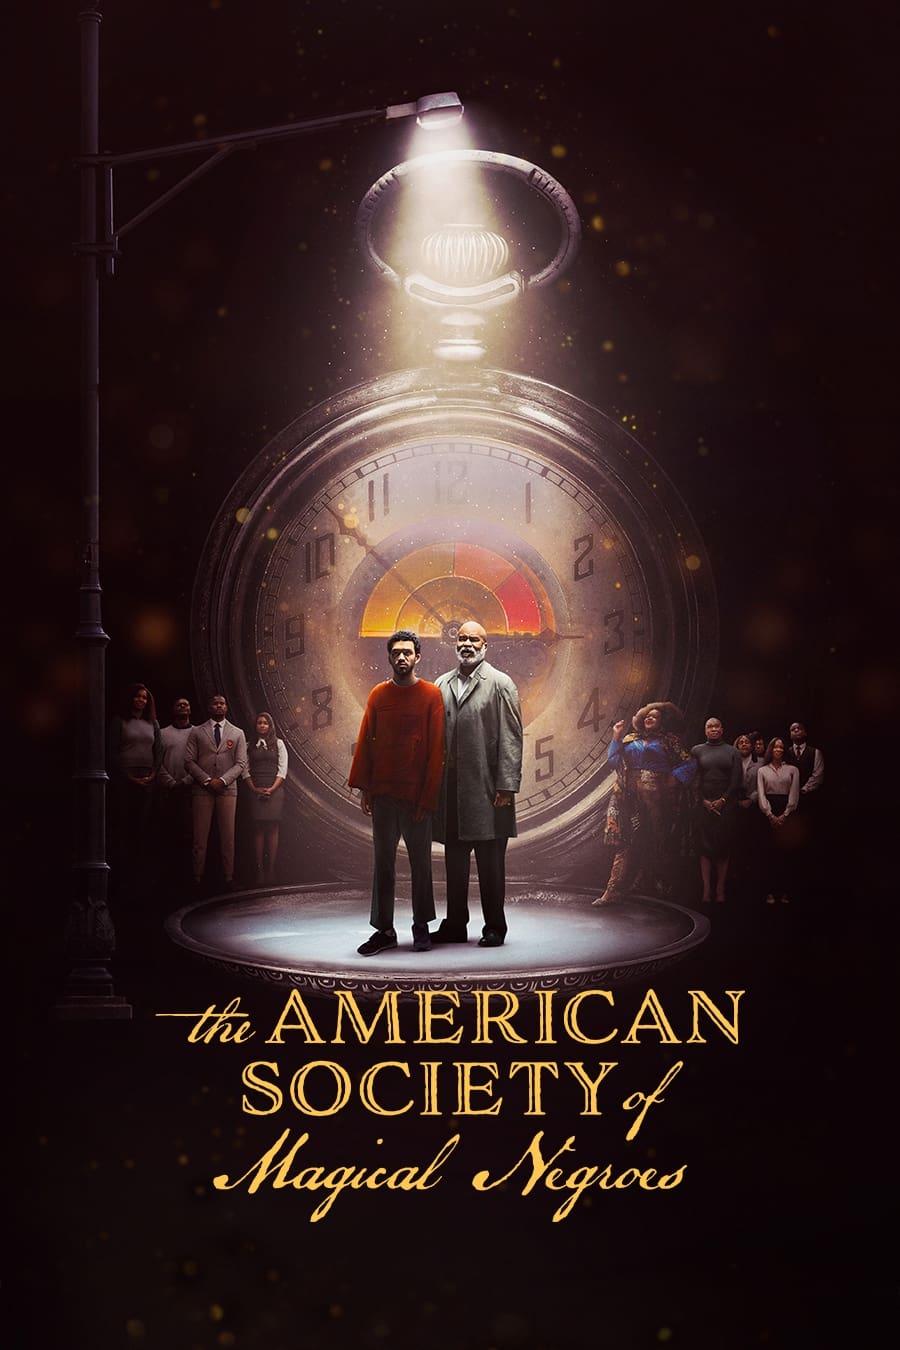 The American Society of Magical Negroes poster